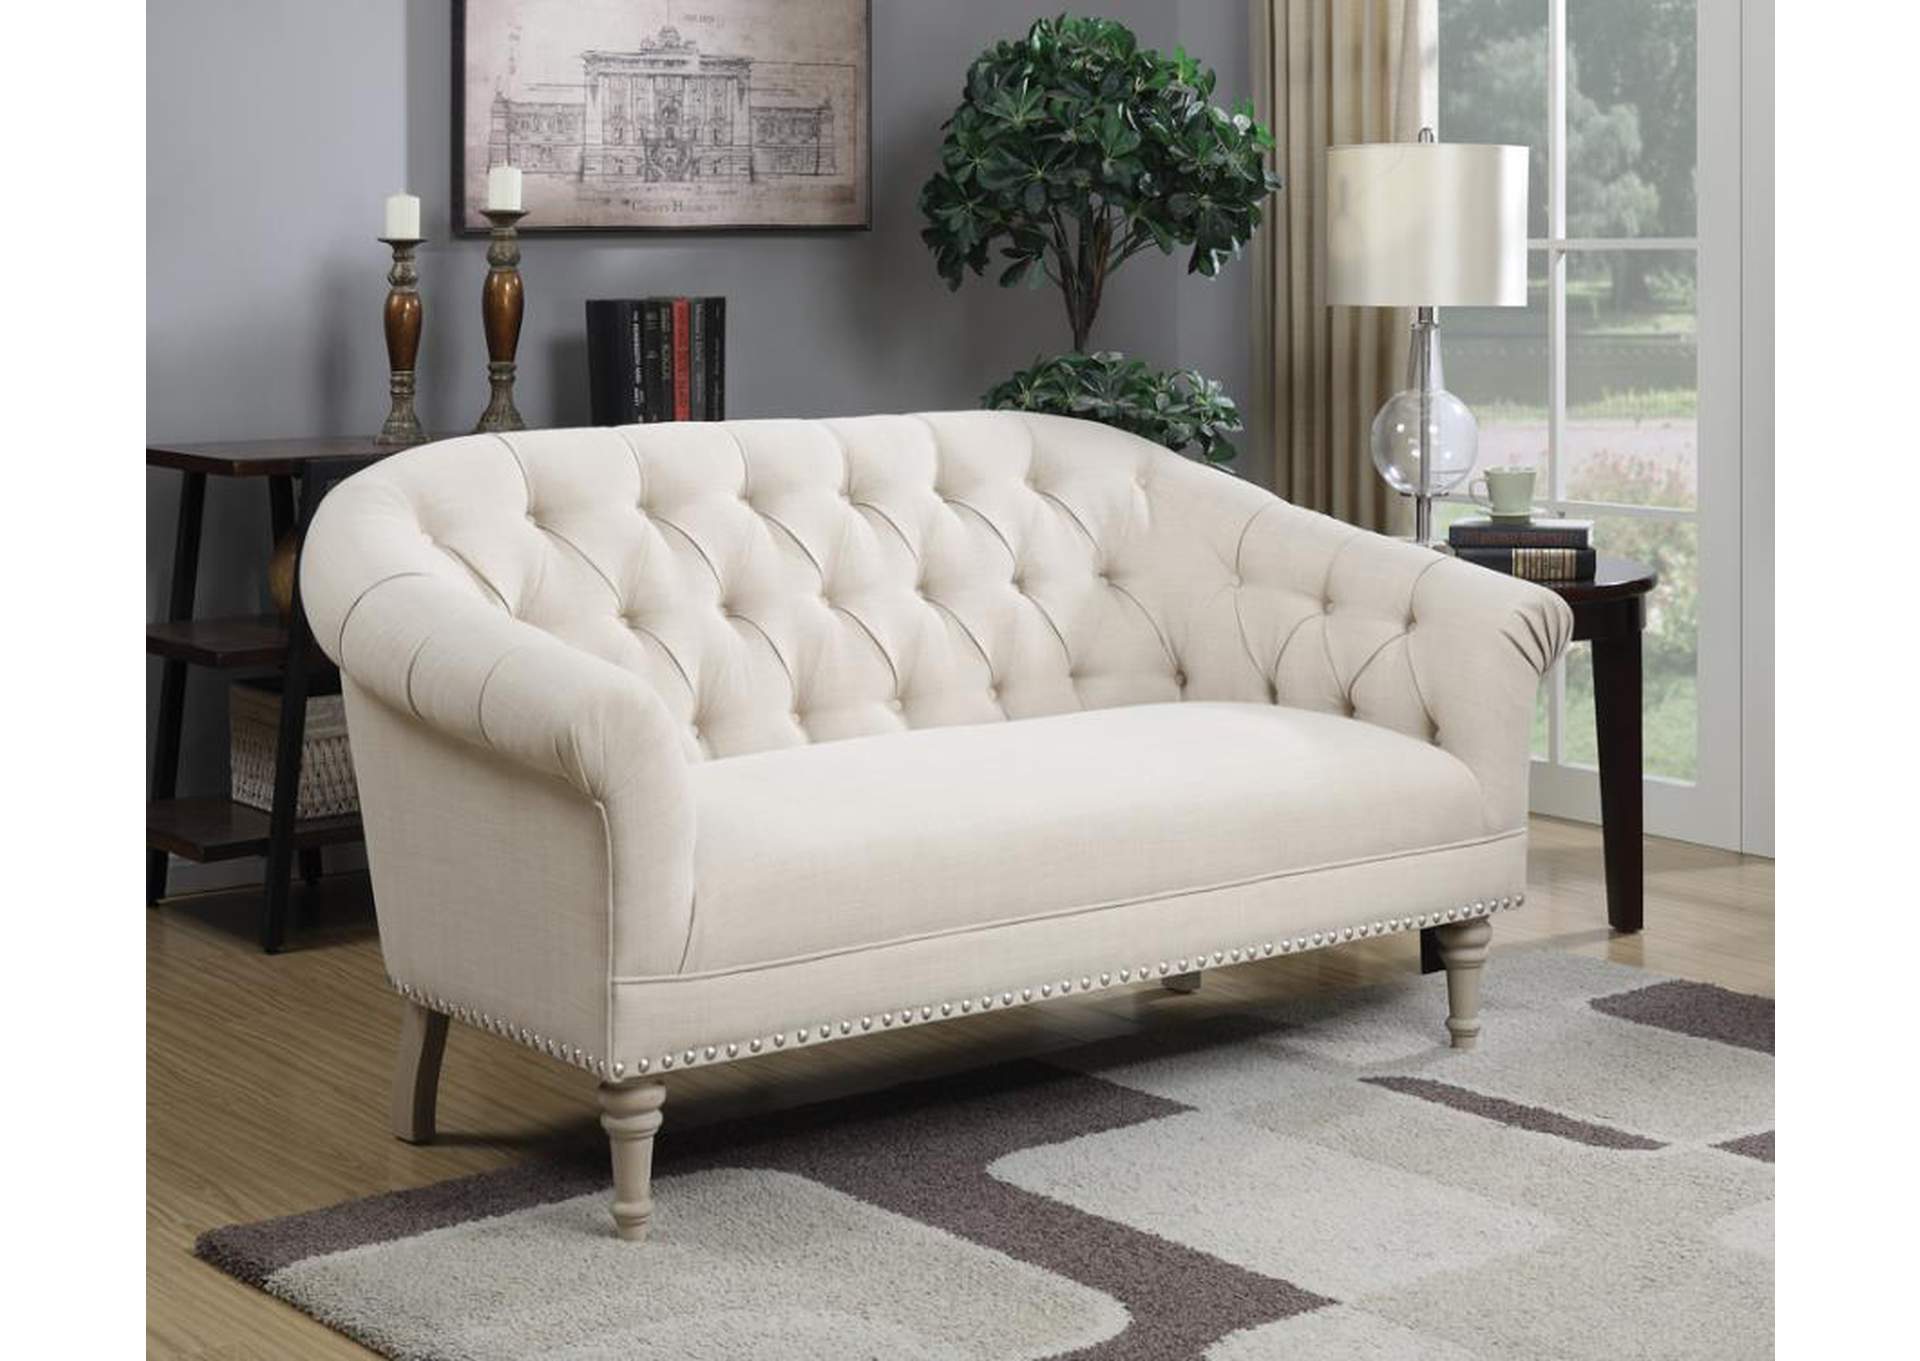 Billie Tufted Back Settee with Roll Arm Natural,Coaster Furniture